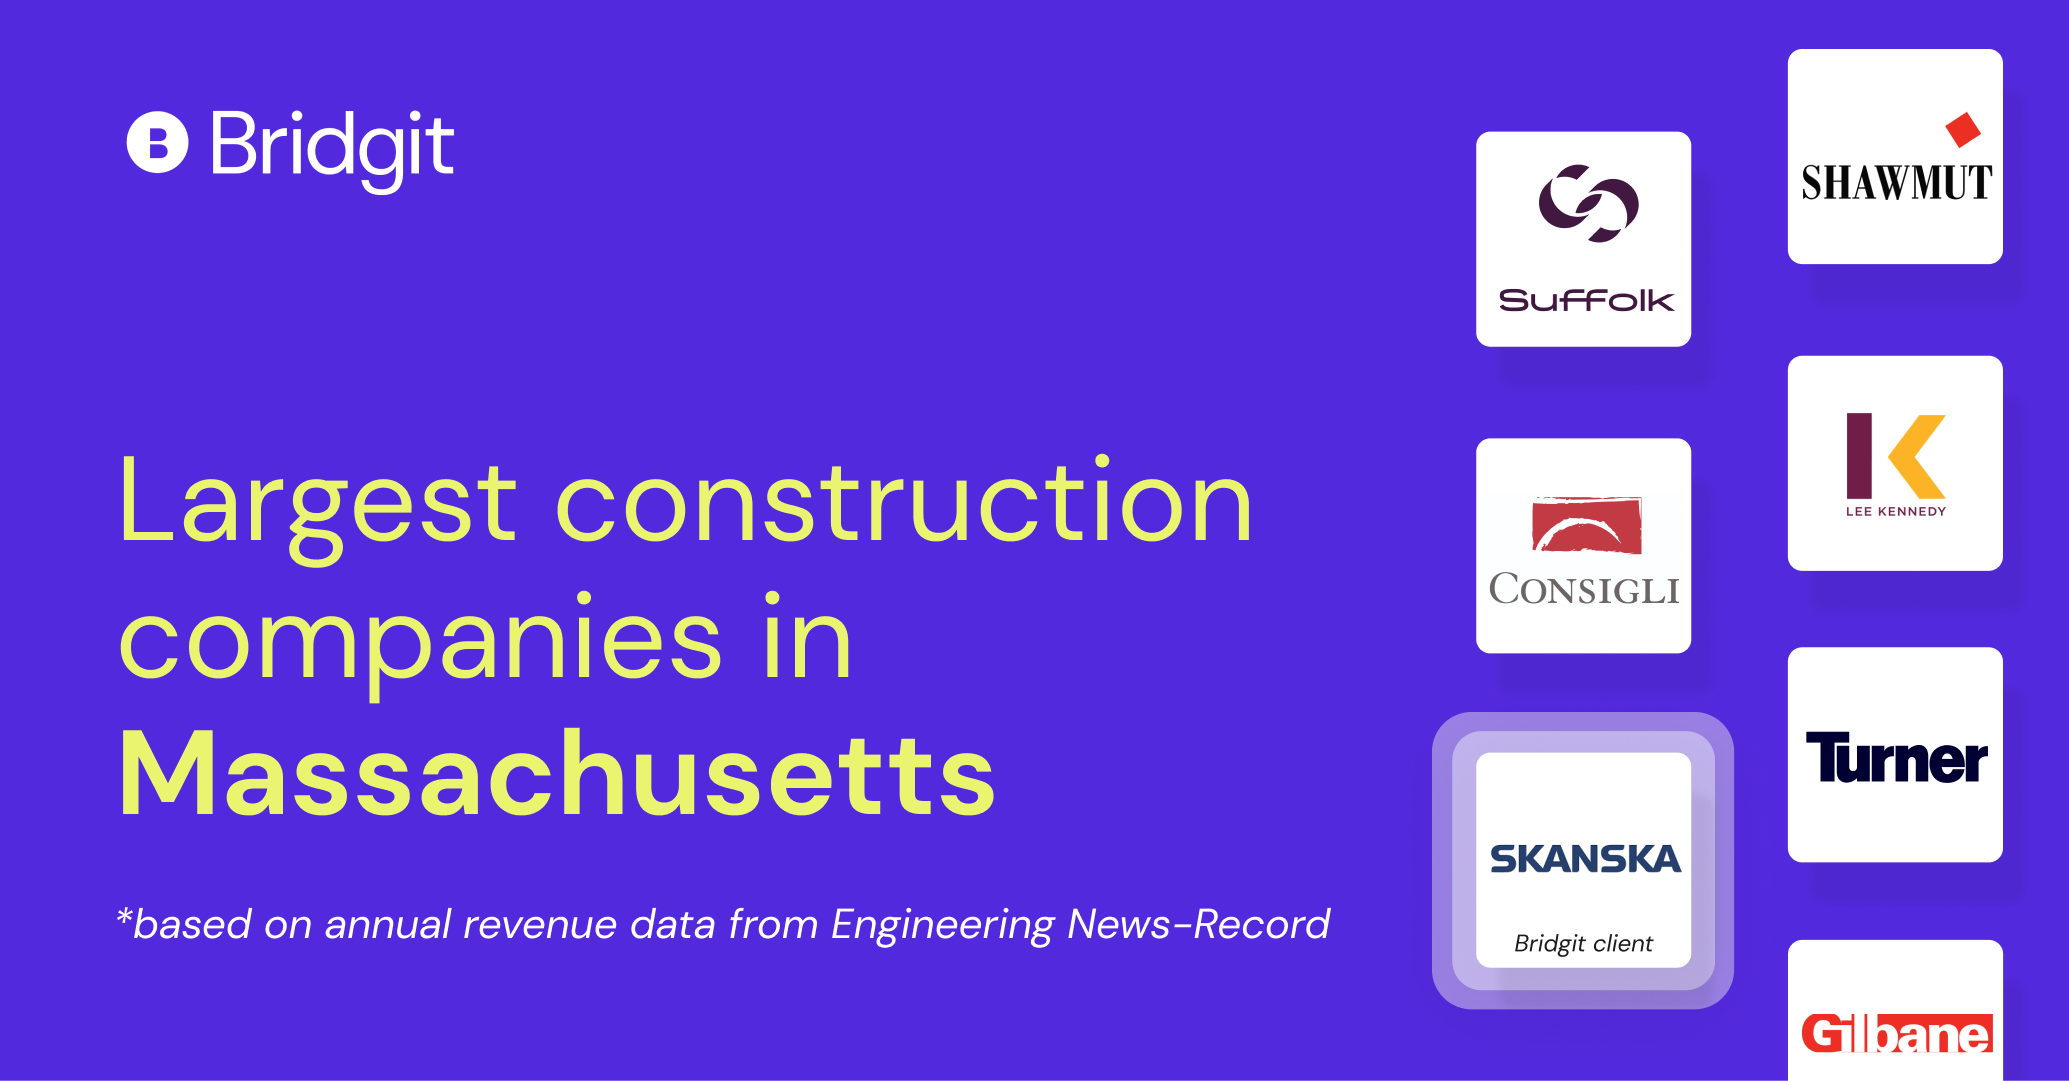 Top construction companies in NYC - Bridgit